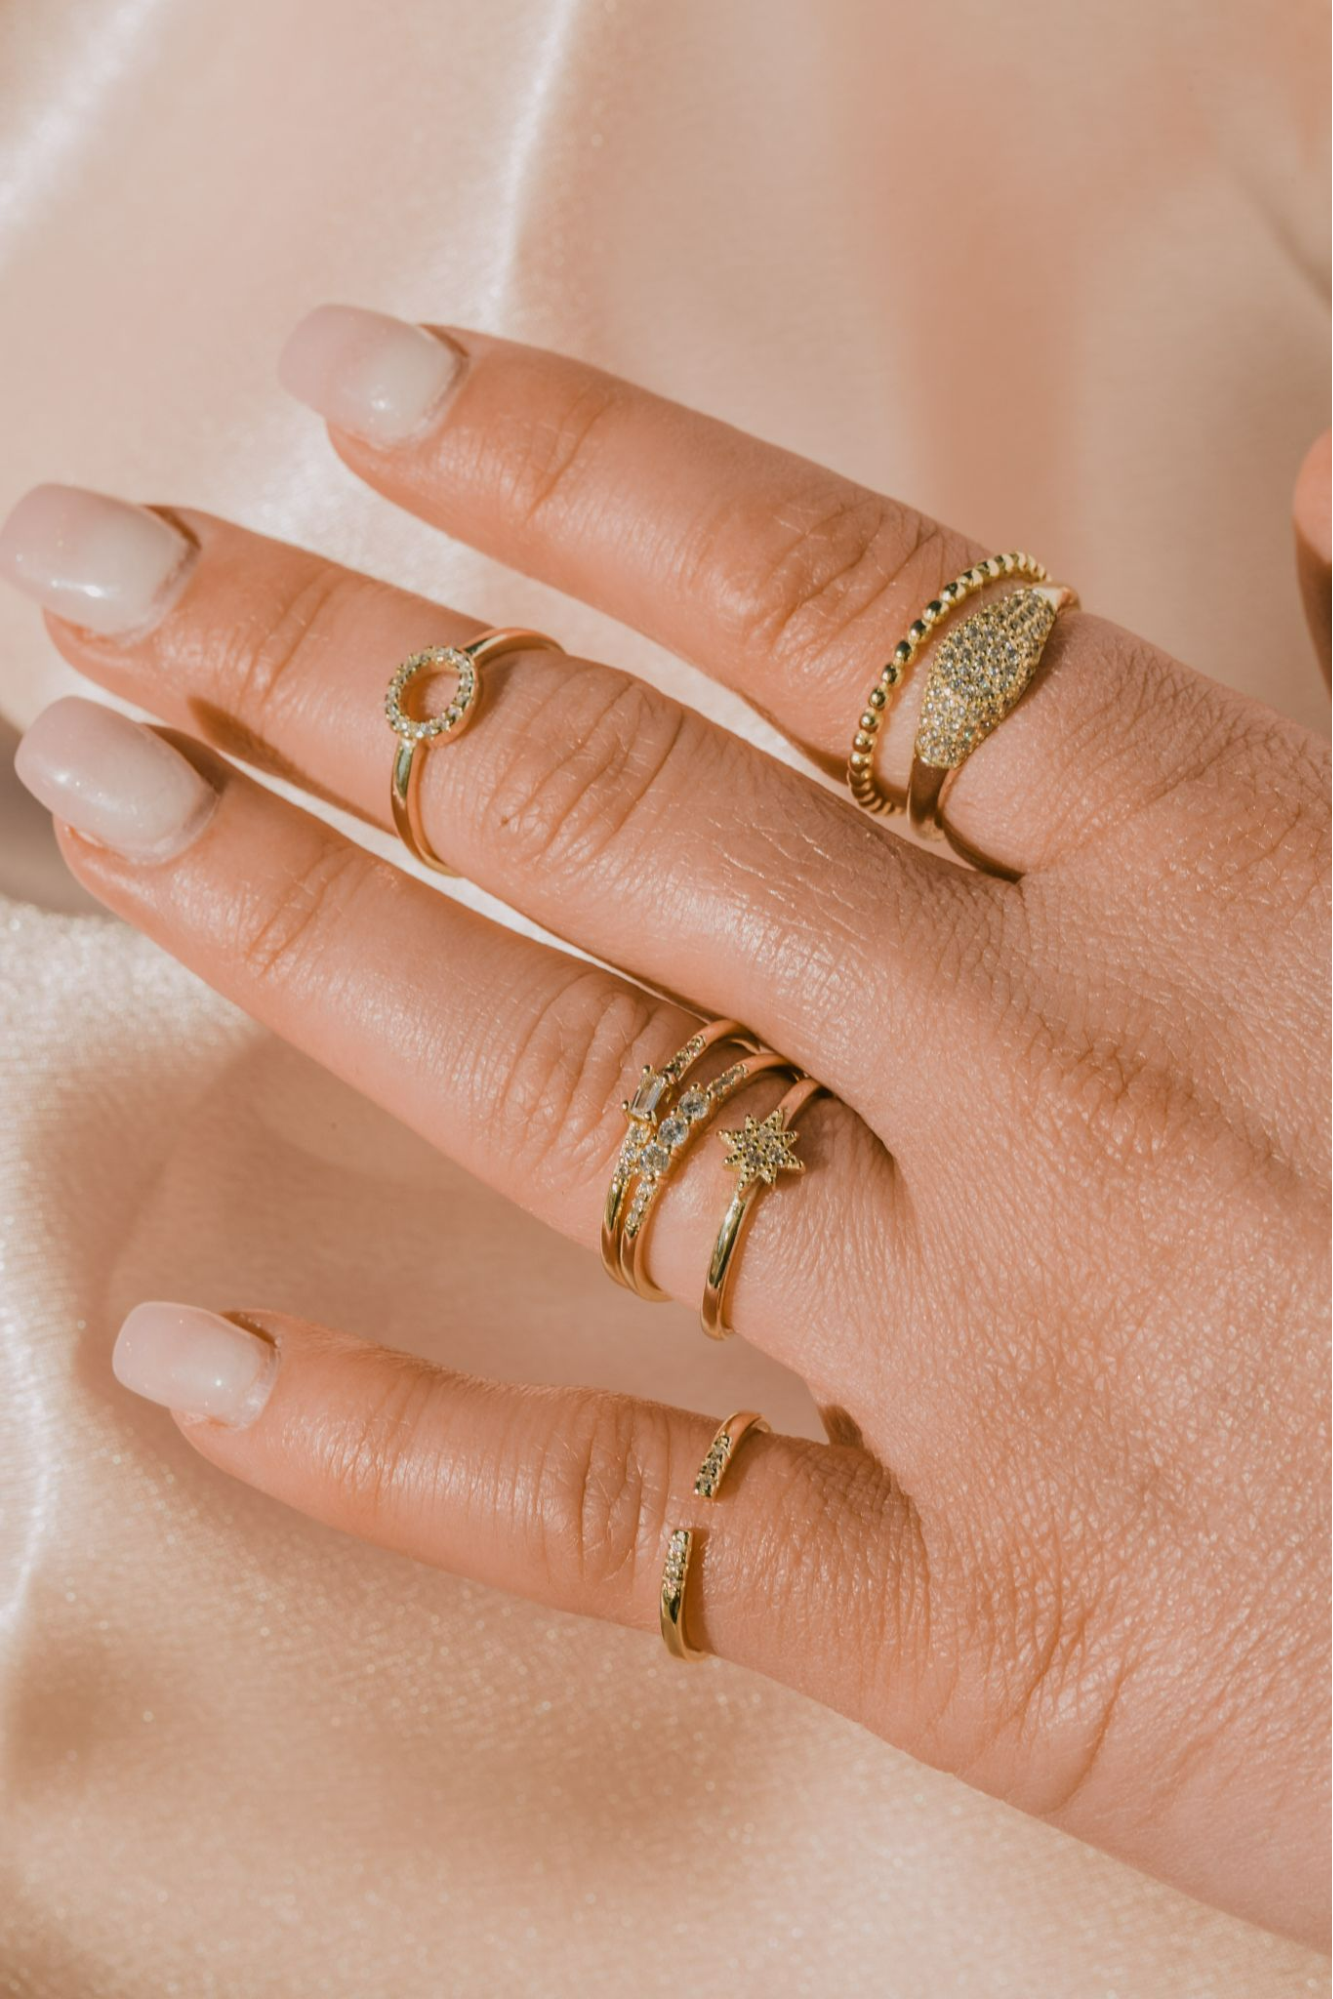 A closeup of a woman's hand wearing gold and diamond stacking rings